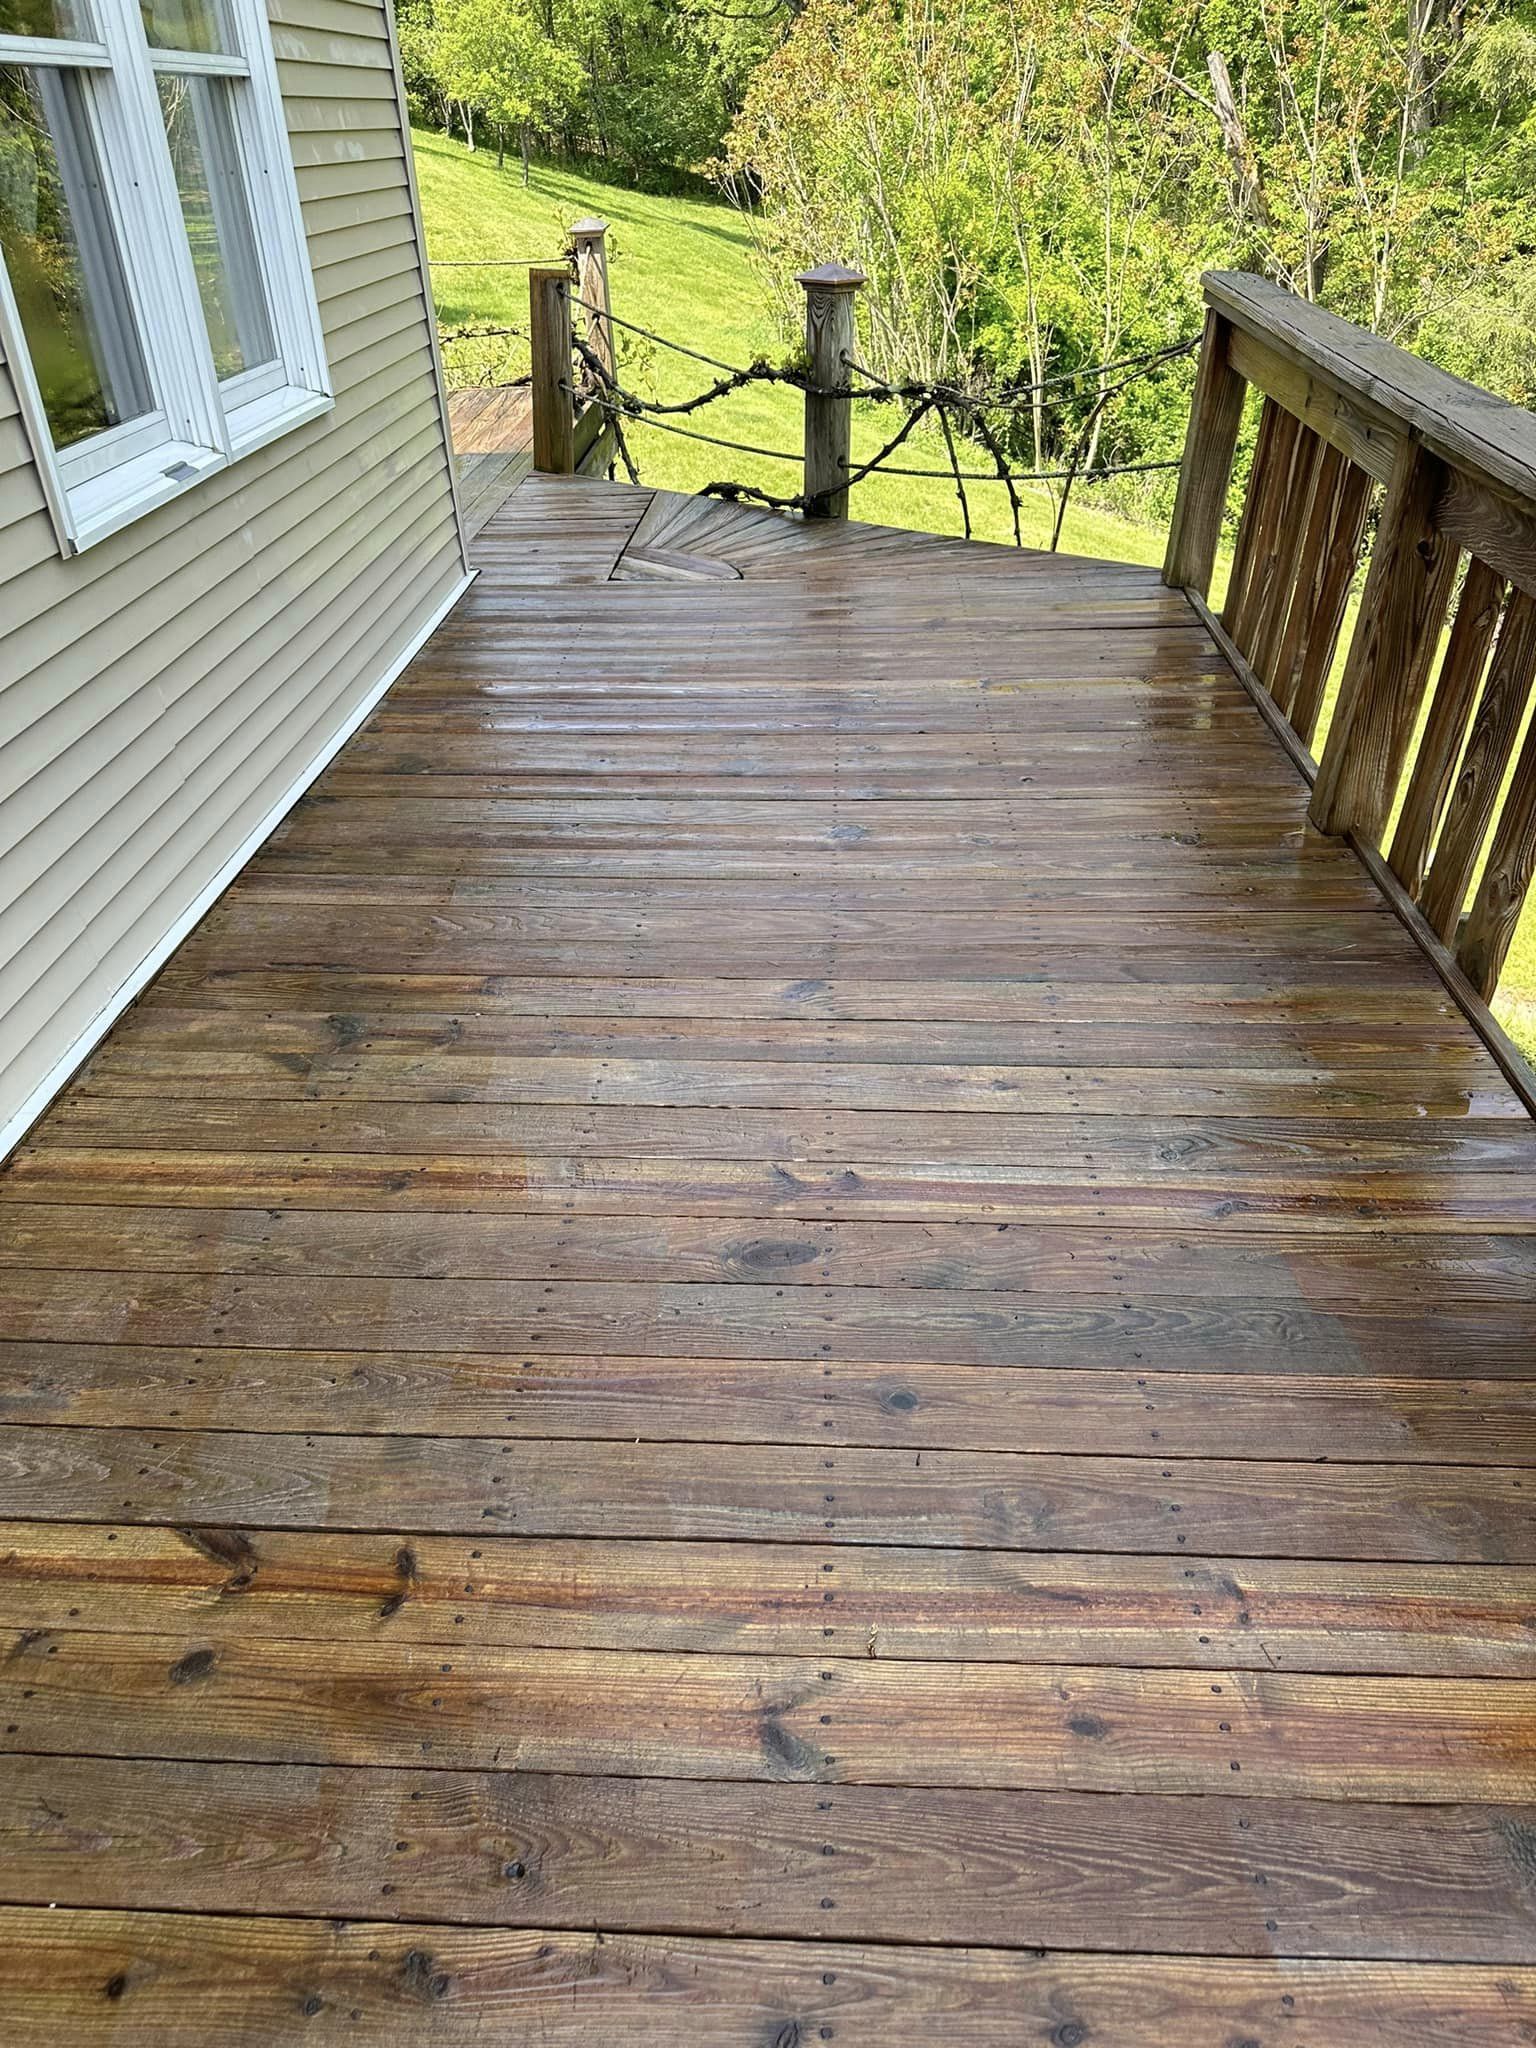 Expert pressure washing services for fence and deck cleaning in Middleburg PA by NextGen Power Wash LLC